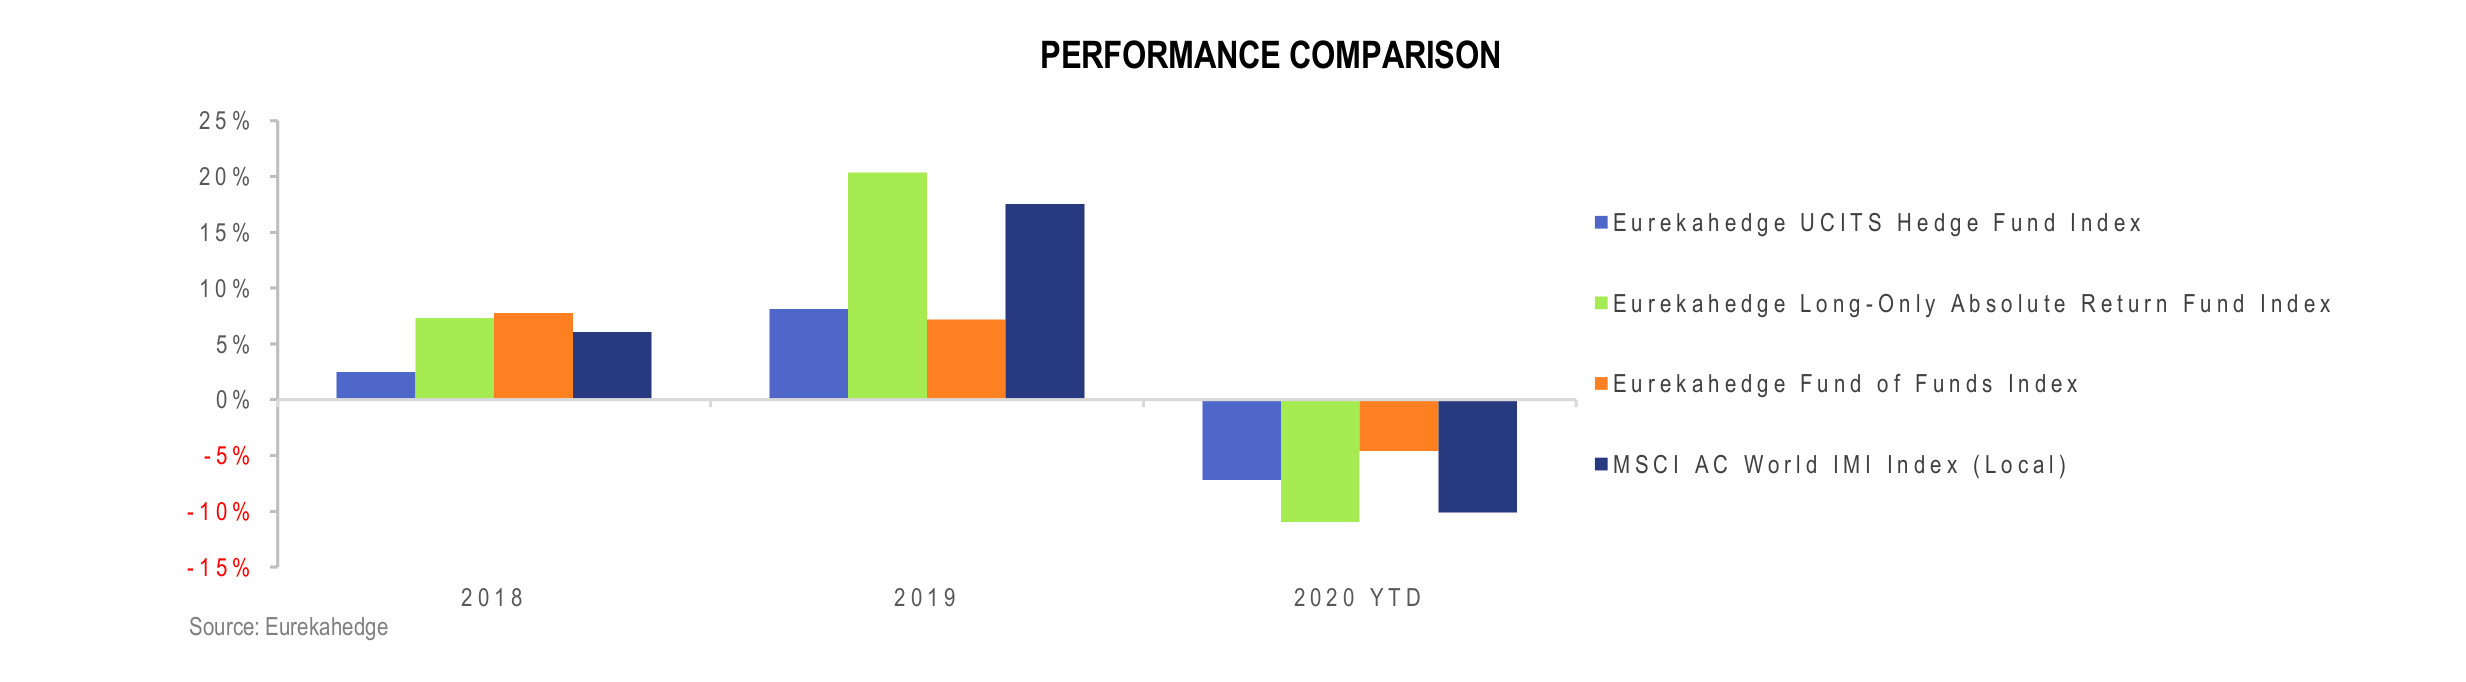 UCITS Hedge Funds Infographic April 2020 - performance comparison